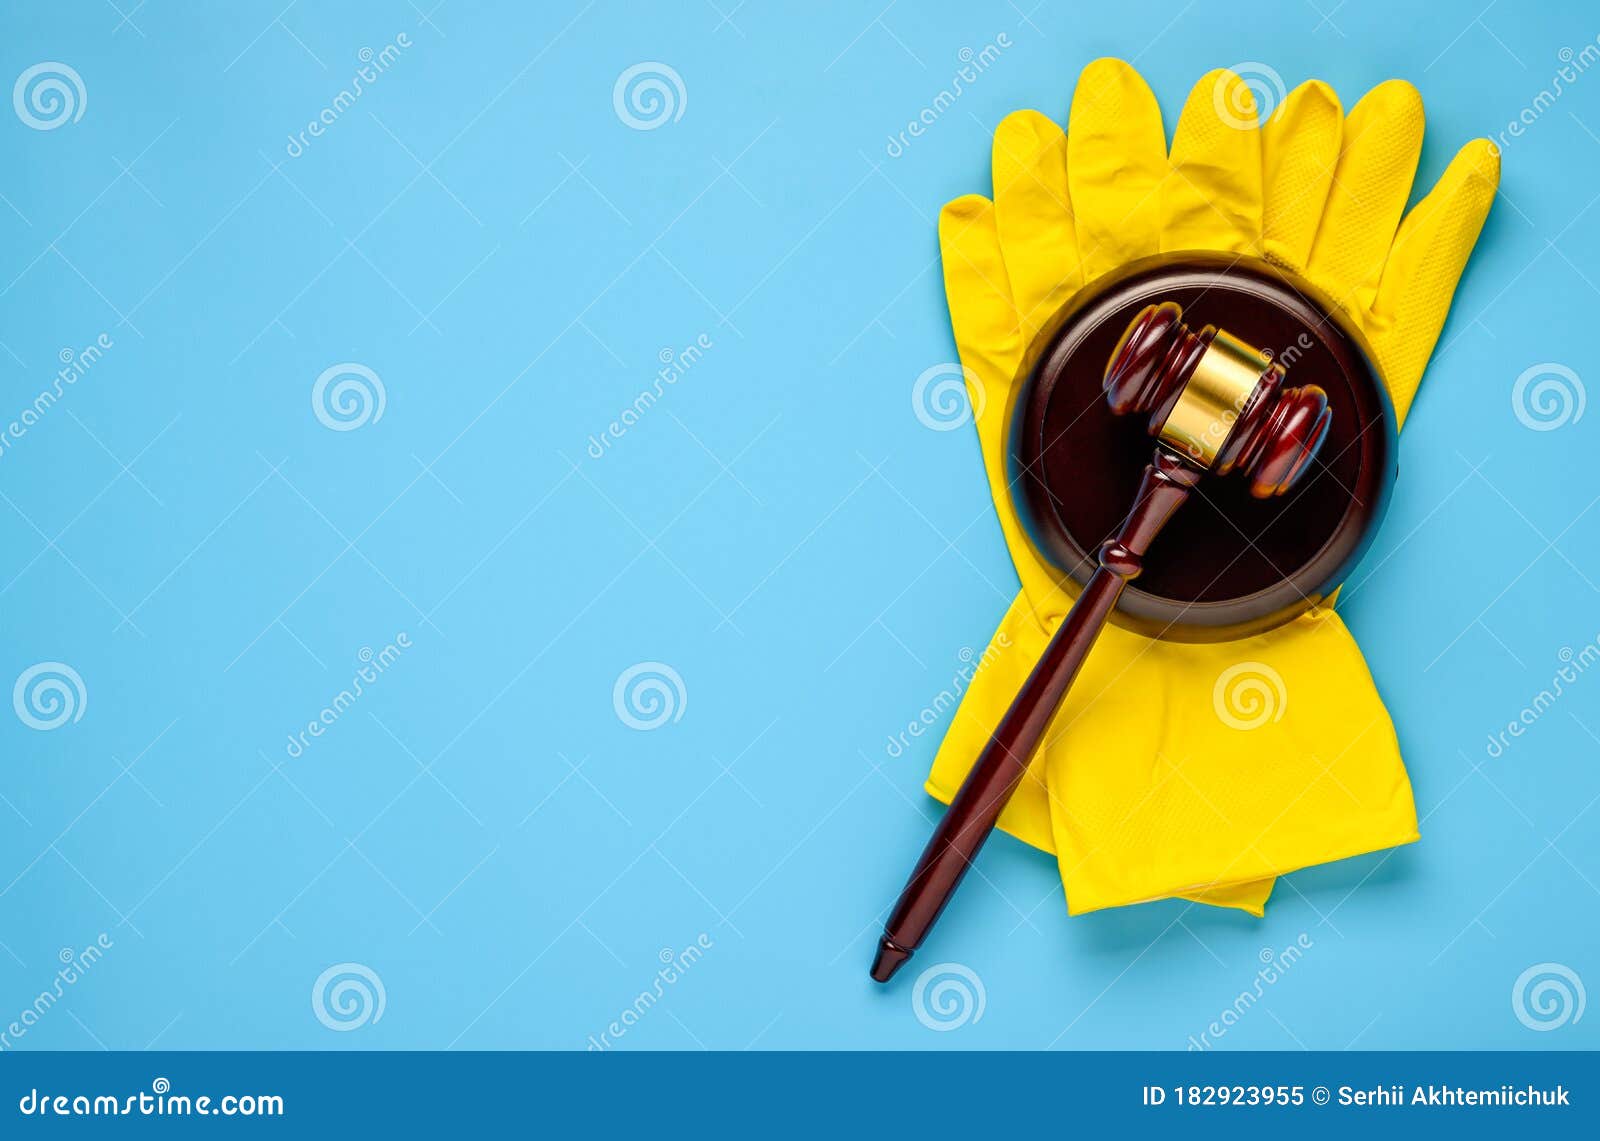 .rubber gloves and mallet on a blue background. concept of litigation at a cleaning company